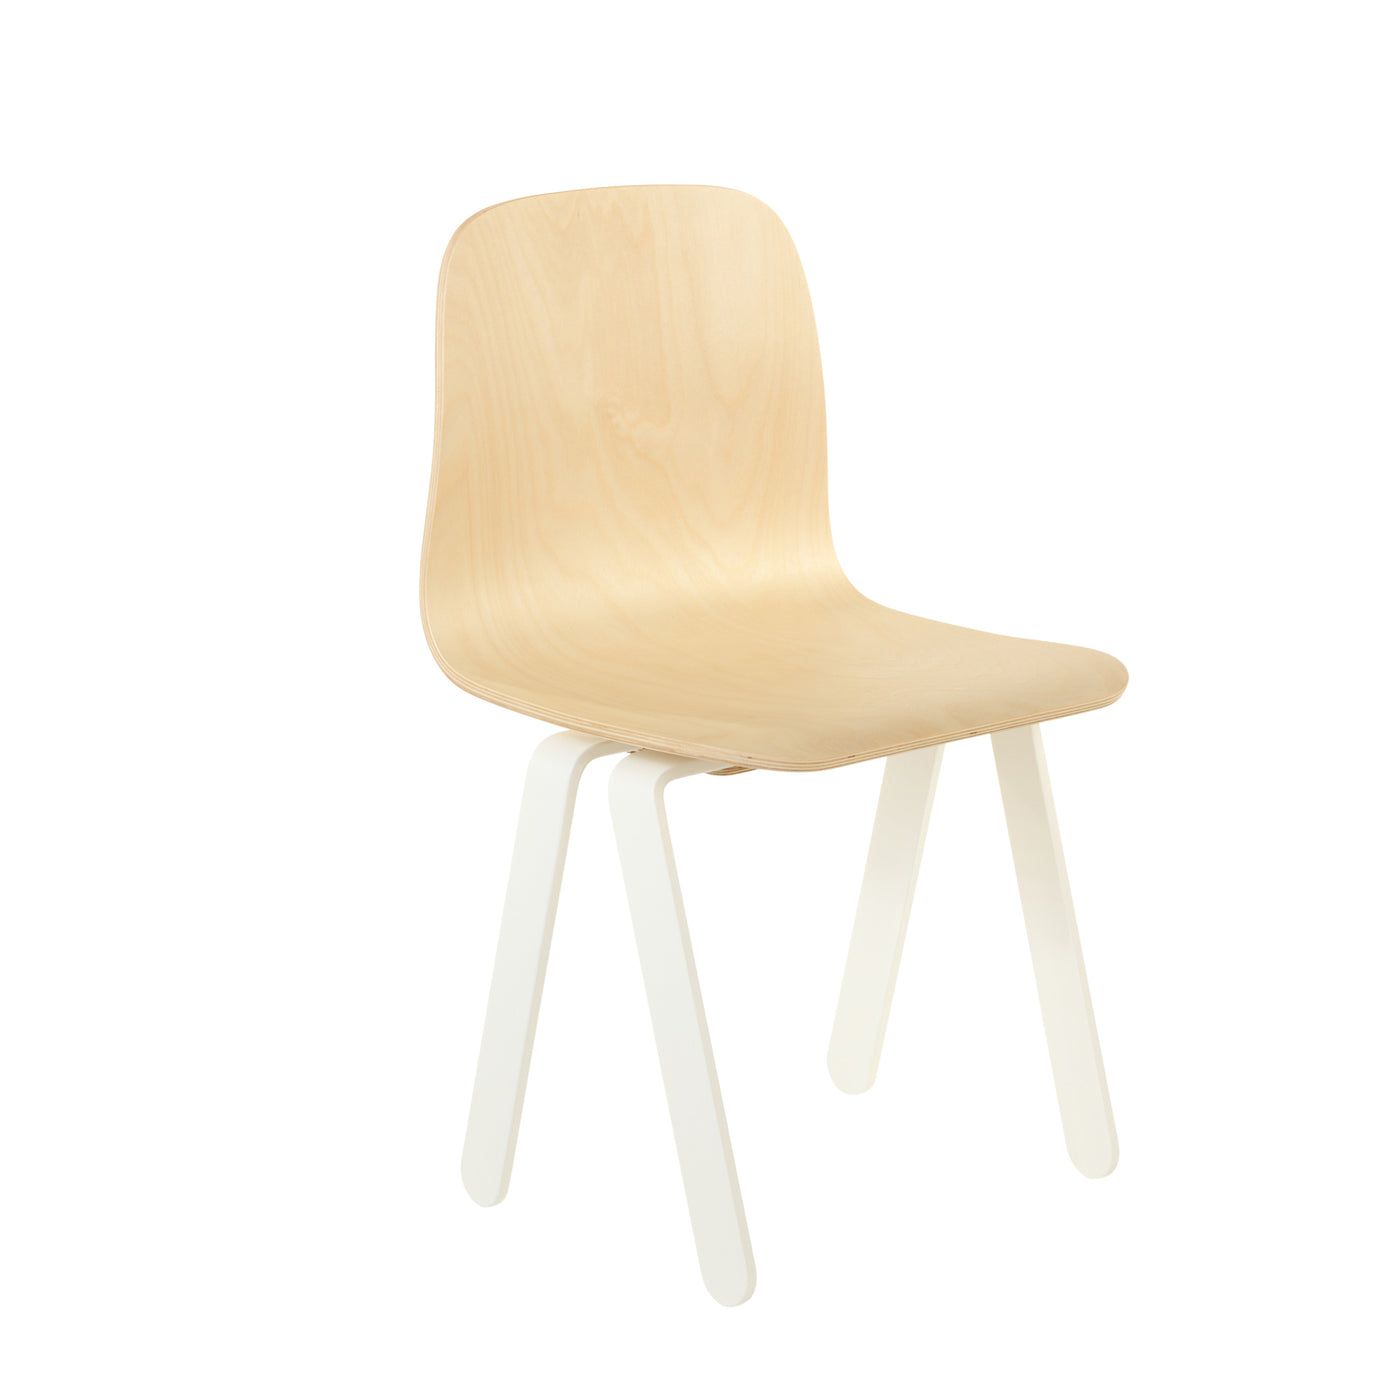 In2Wood Kids Chair - White